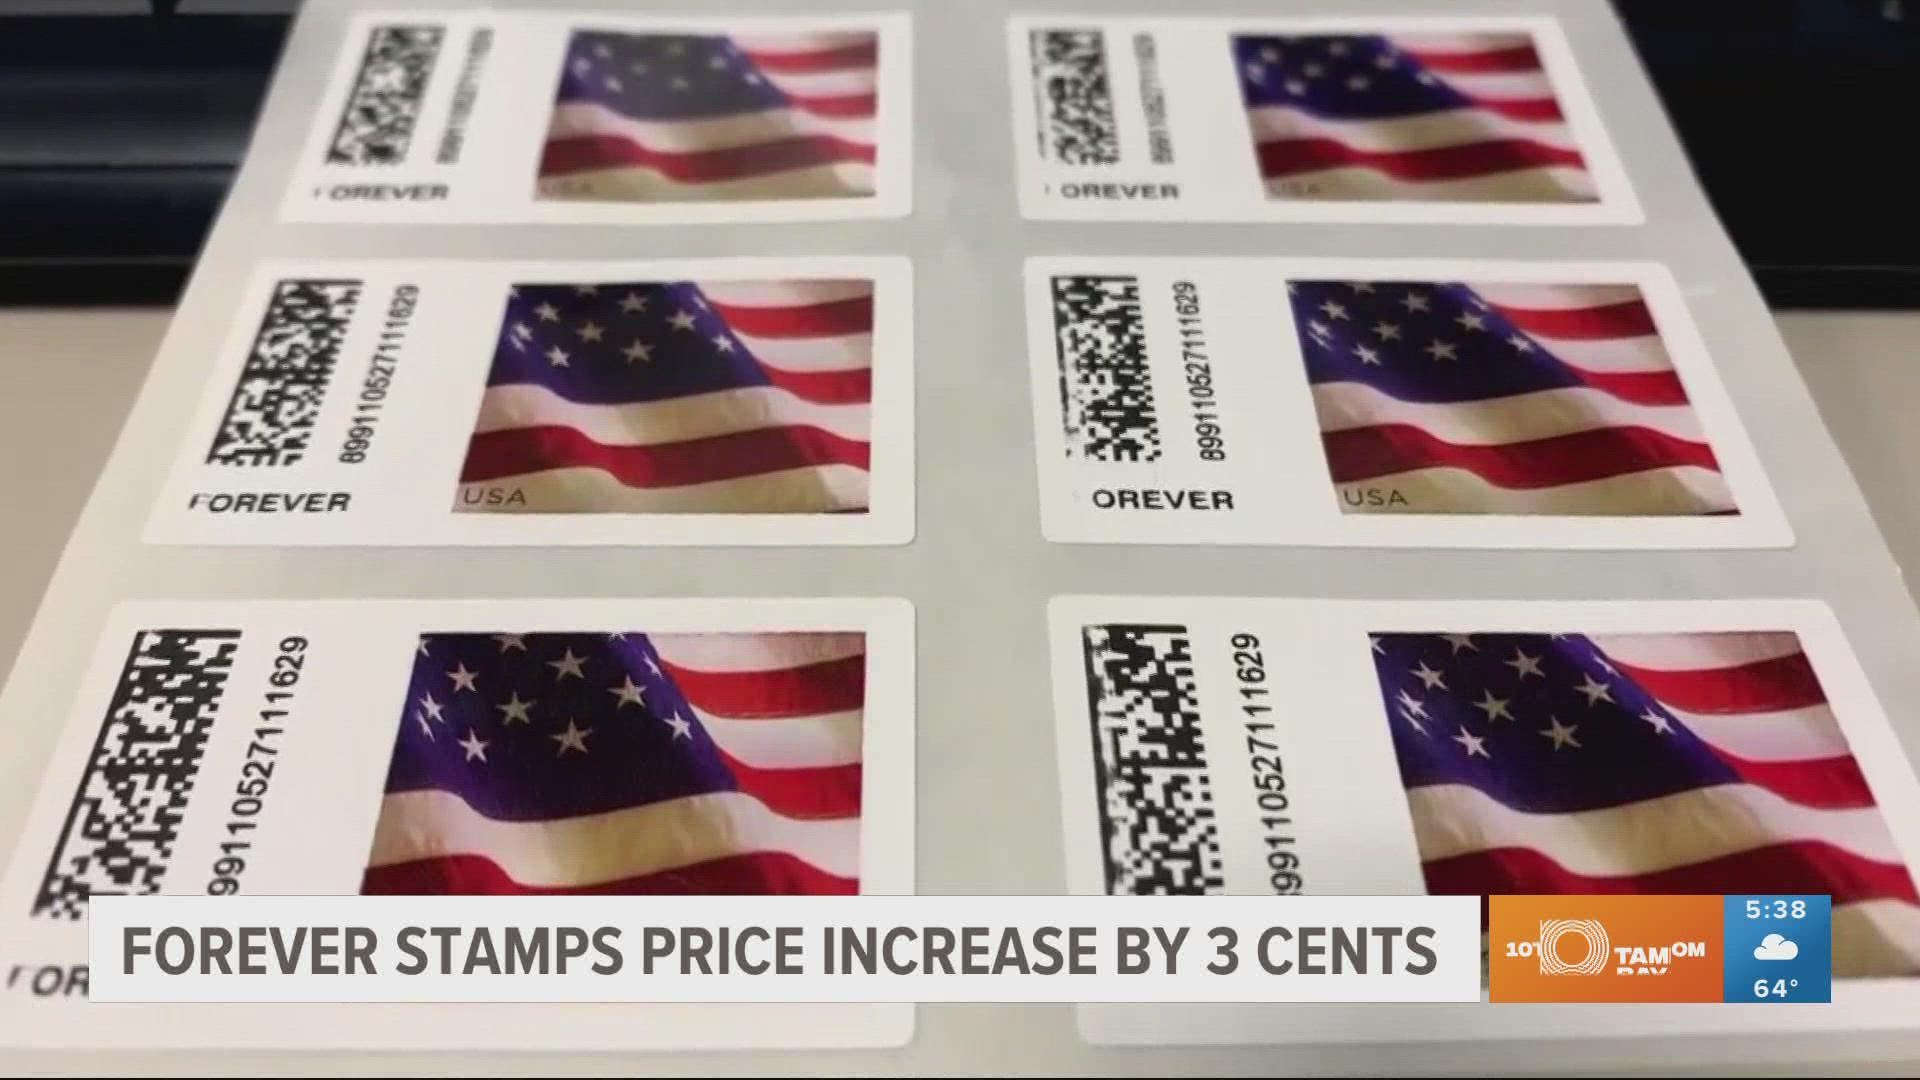 Forever Stamps now cost 63 cents.